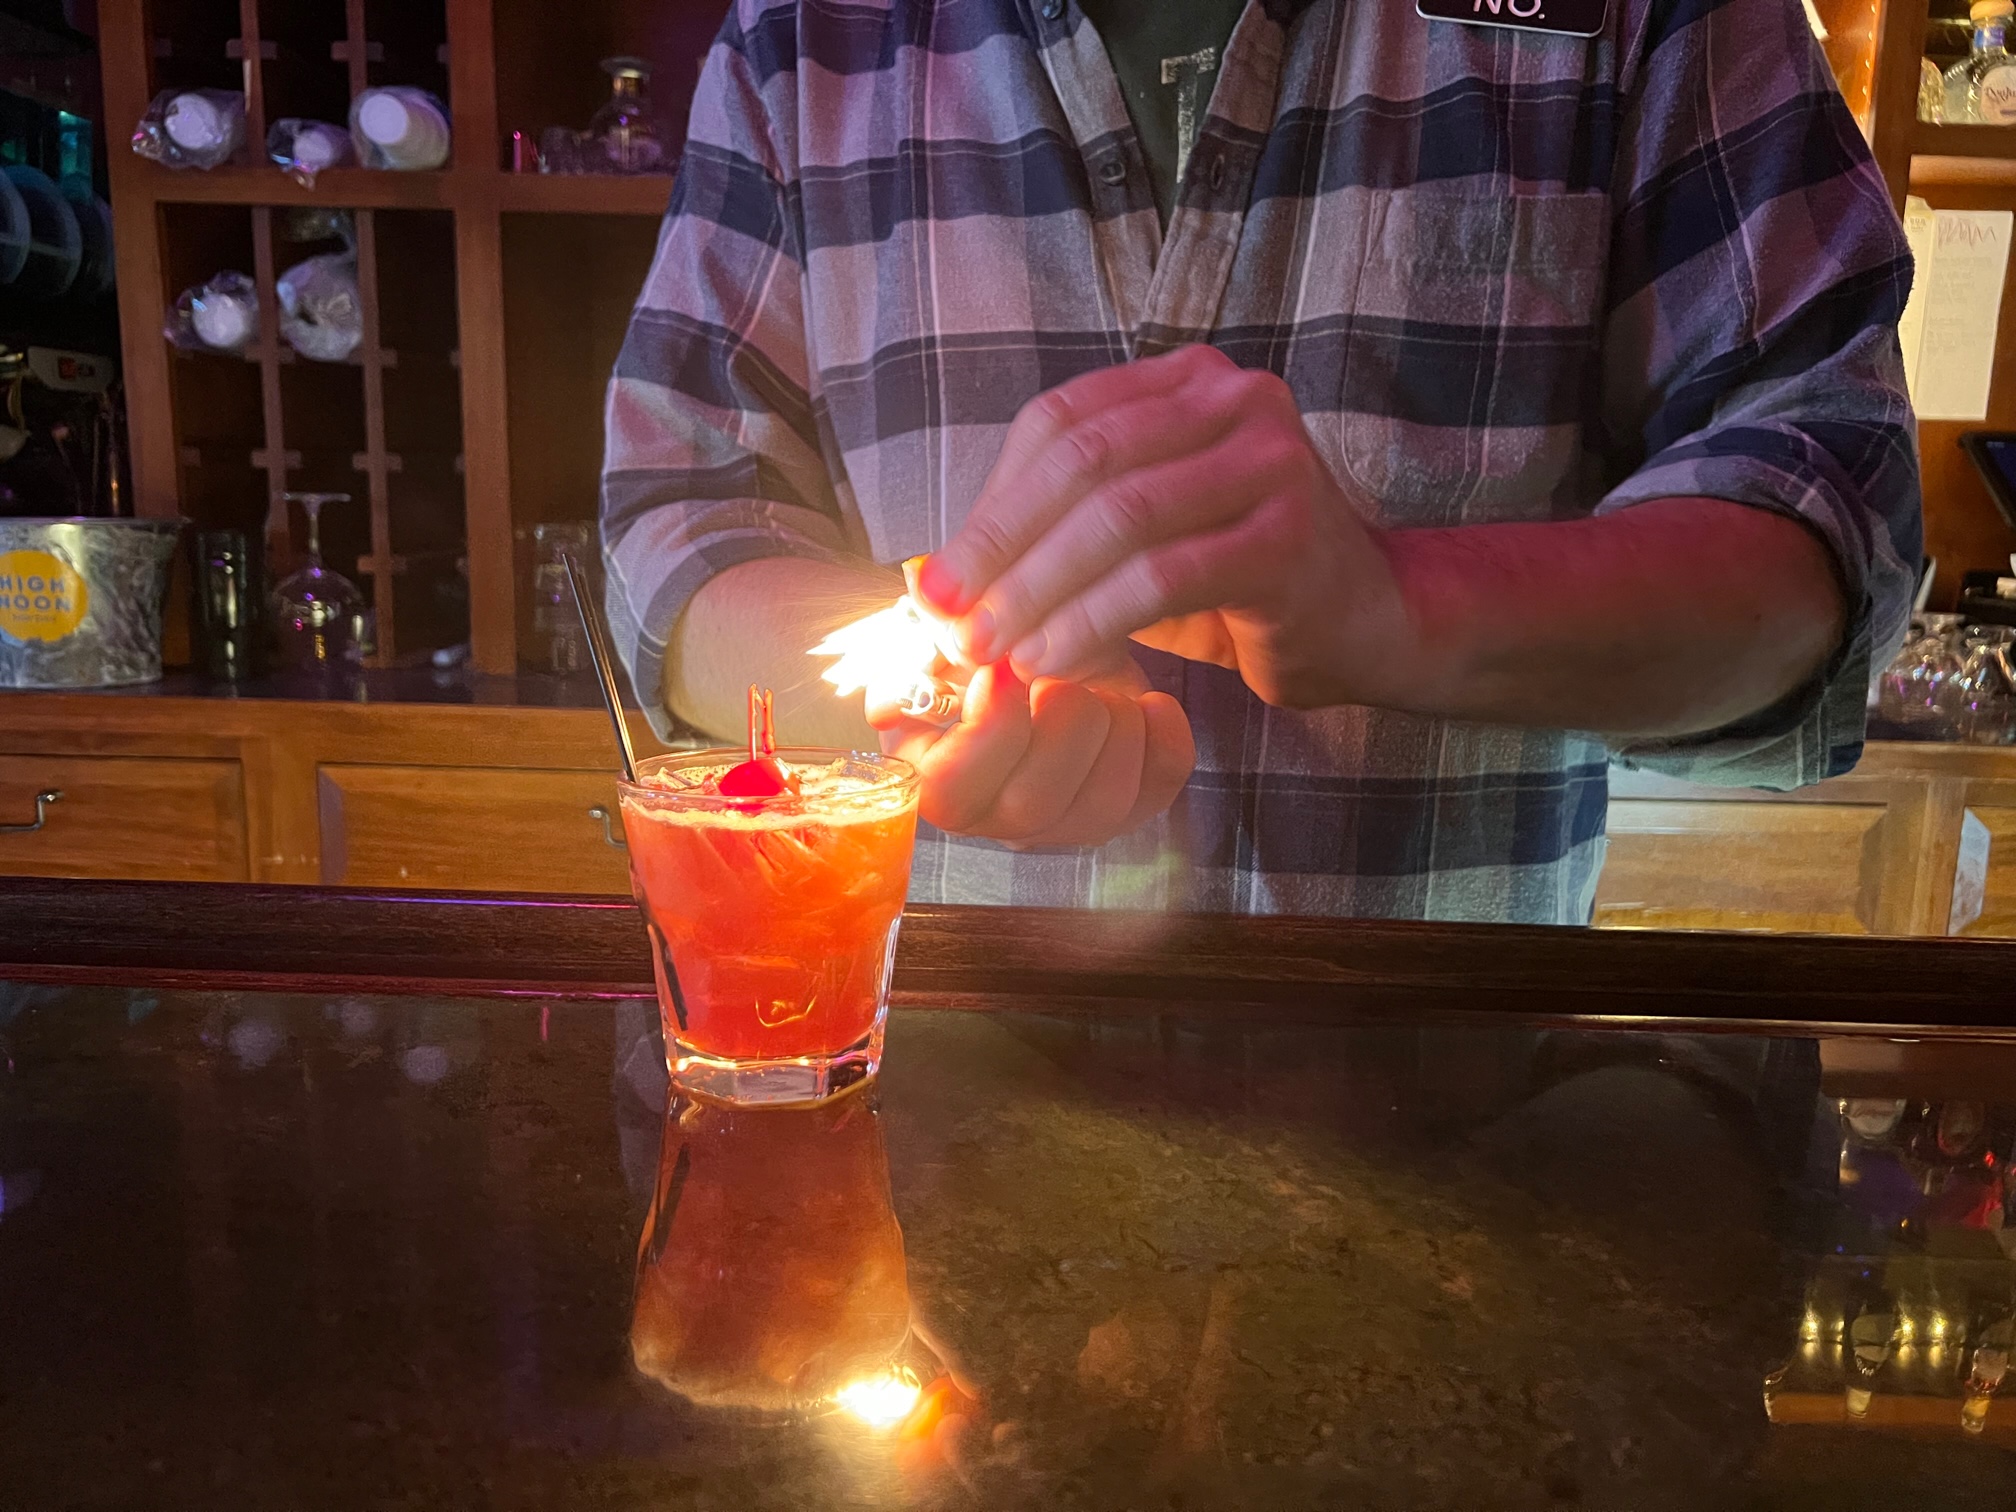 A bartender flames a citrus peel over an old fashioned at Bentley's Pub. Photo by Alyssa Buckley.